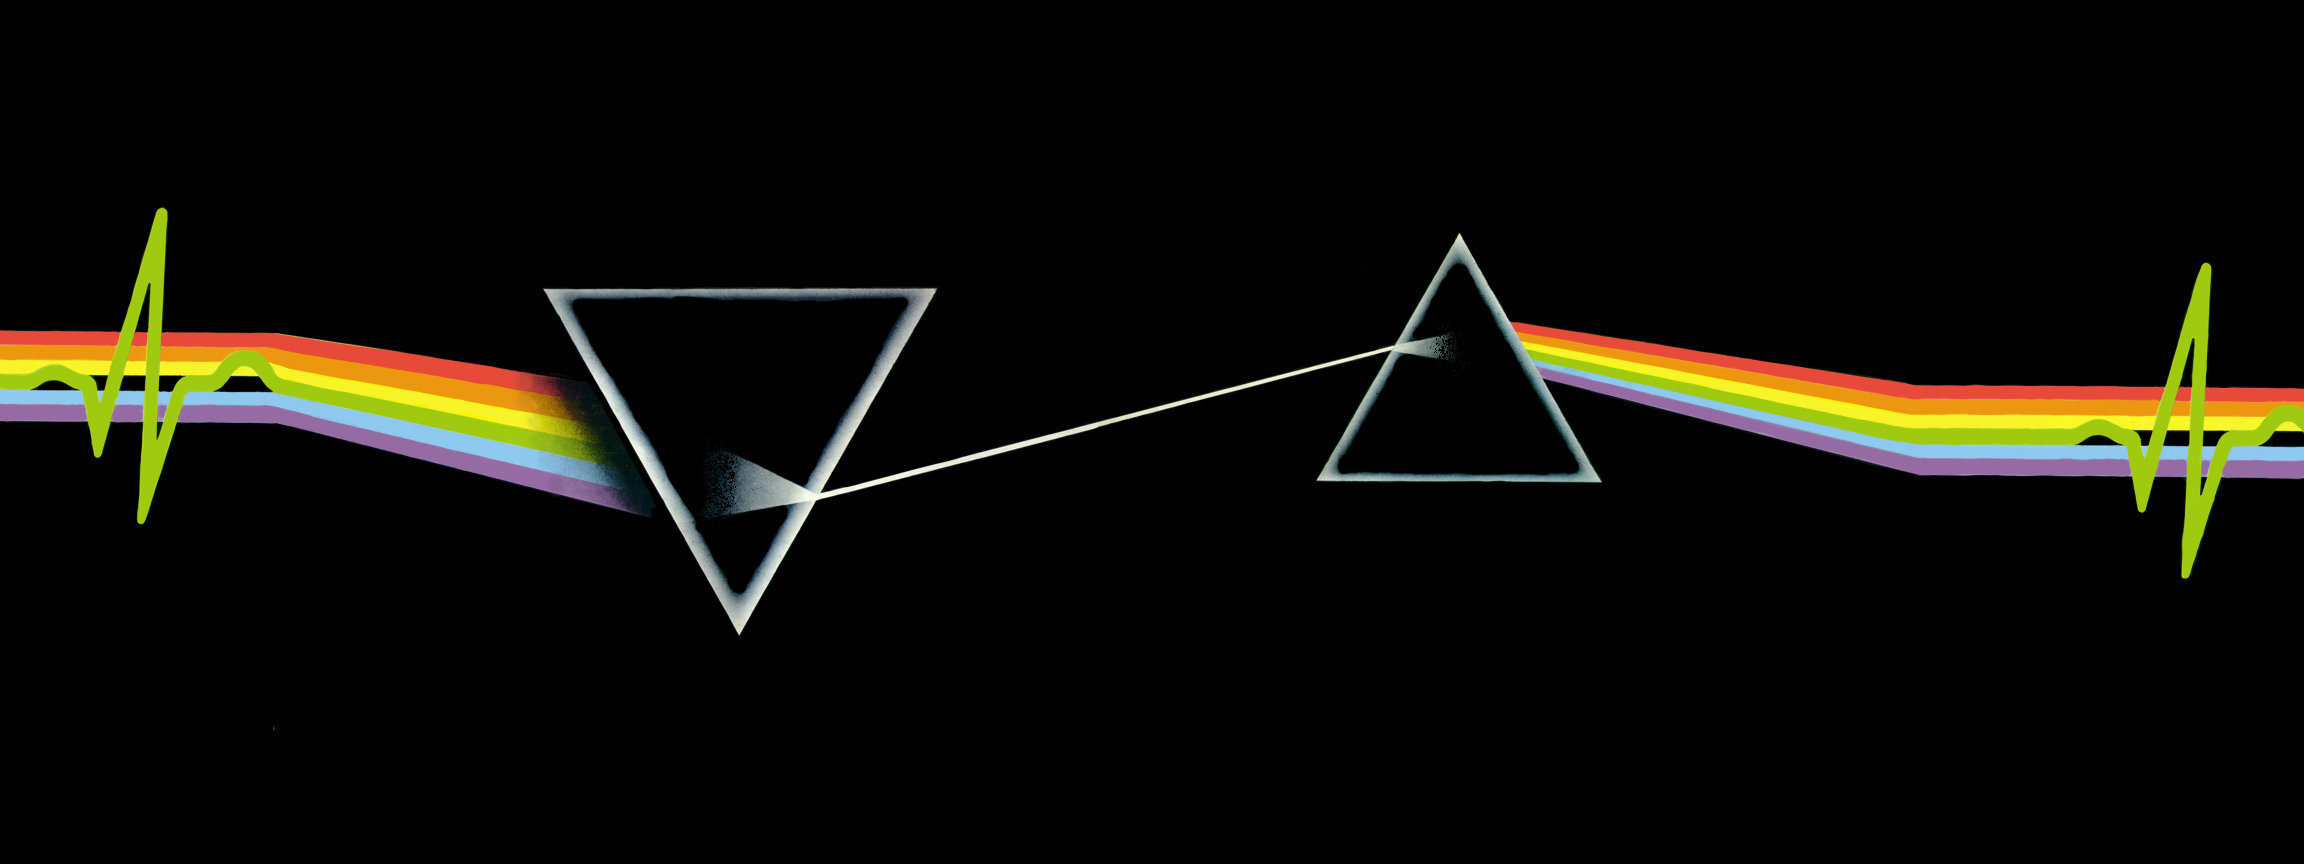 Dark Side Of The Moon By Dabeck